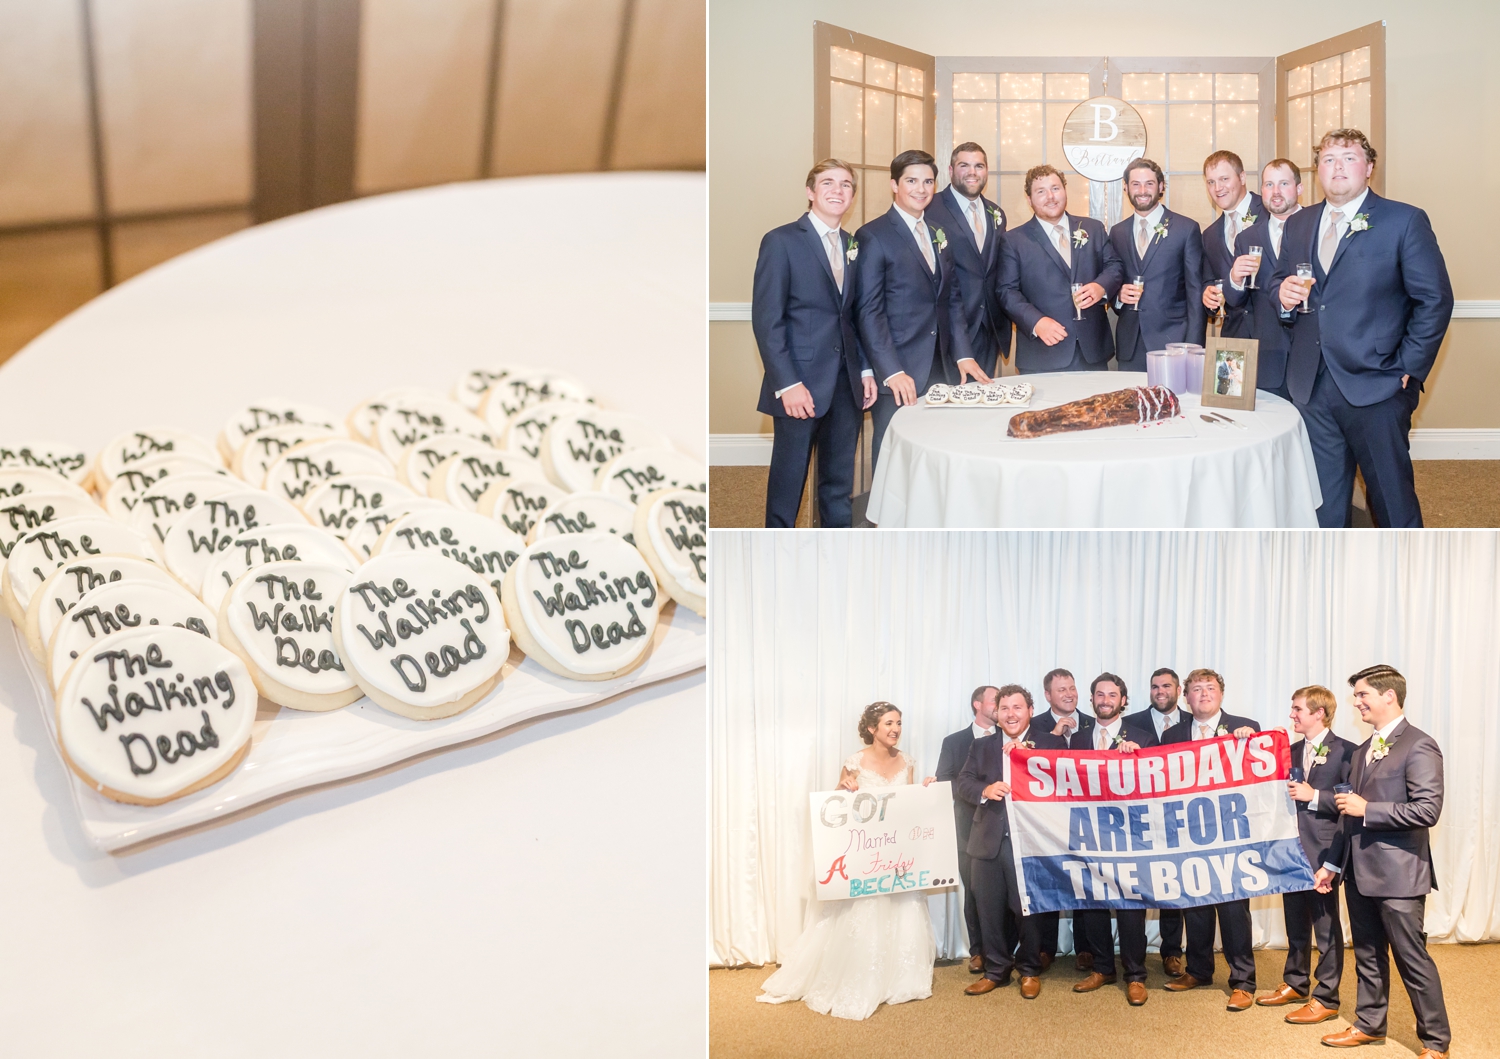  Steven made a sign that said, “Got married on a Friday because…” and the flag says, “Saturdays are for the boys” haha! 